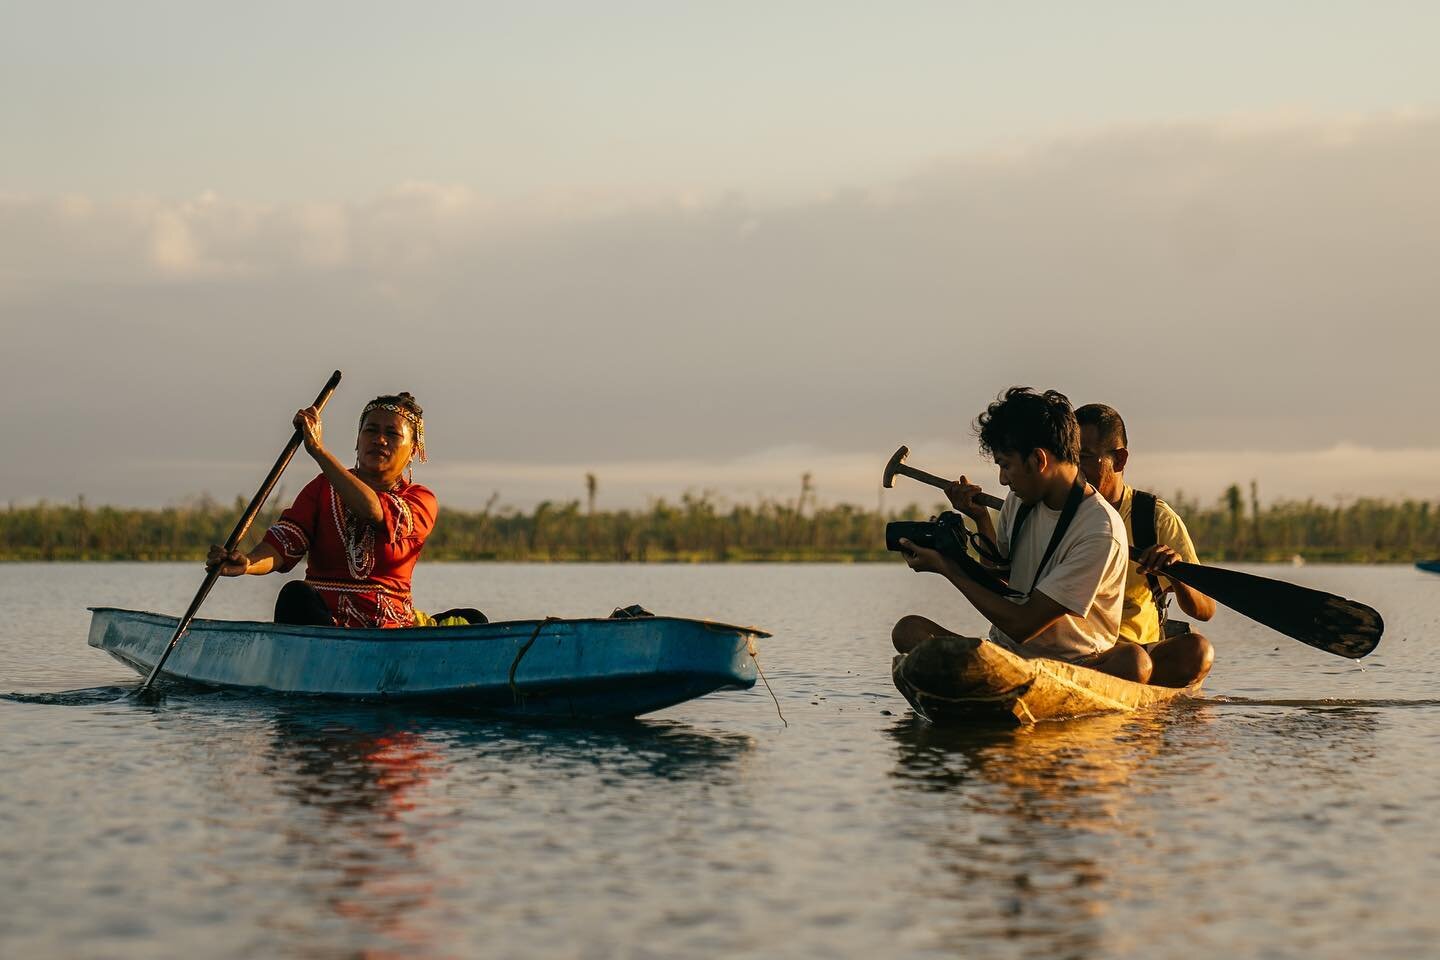 Gab Mejia filming in the Agusan marshlands in the Philippines for BBC Future Planet&rsquo;s Climate Guardians